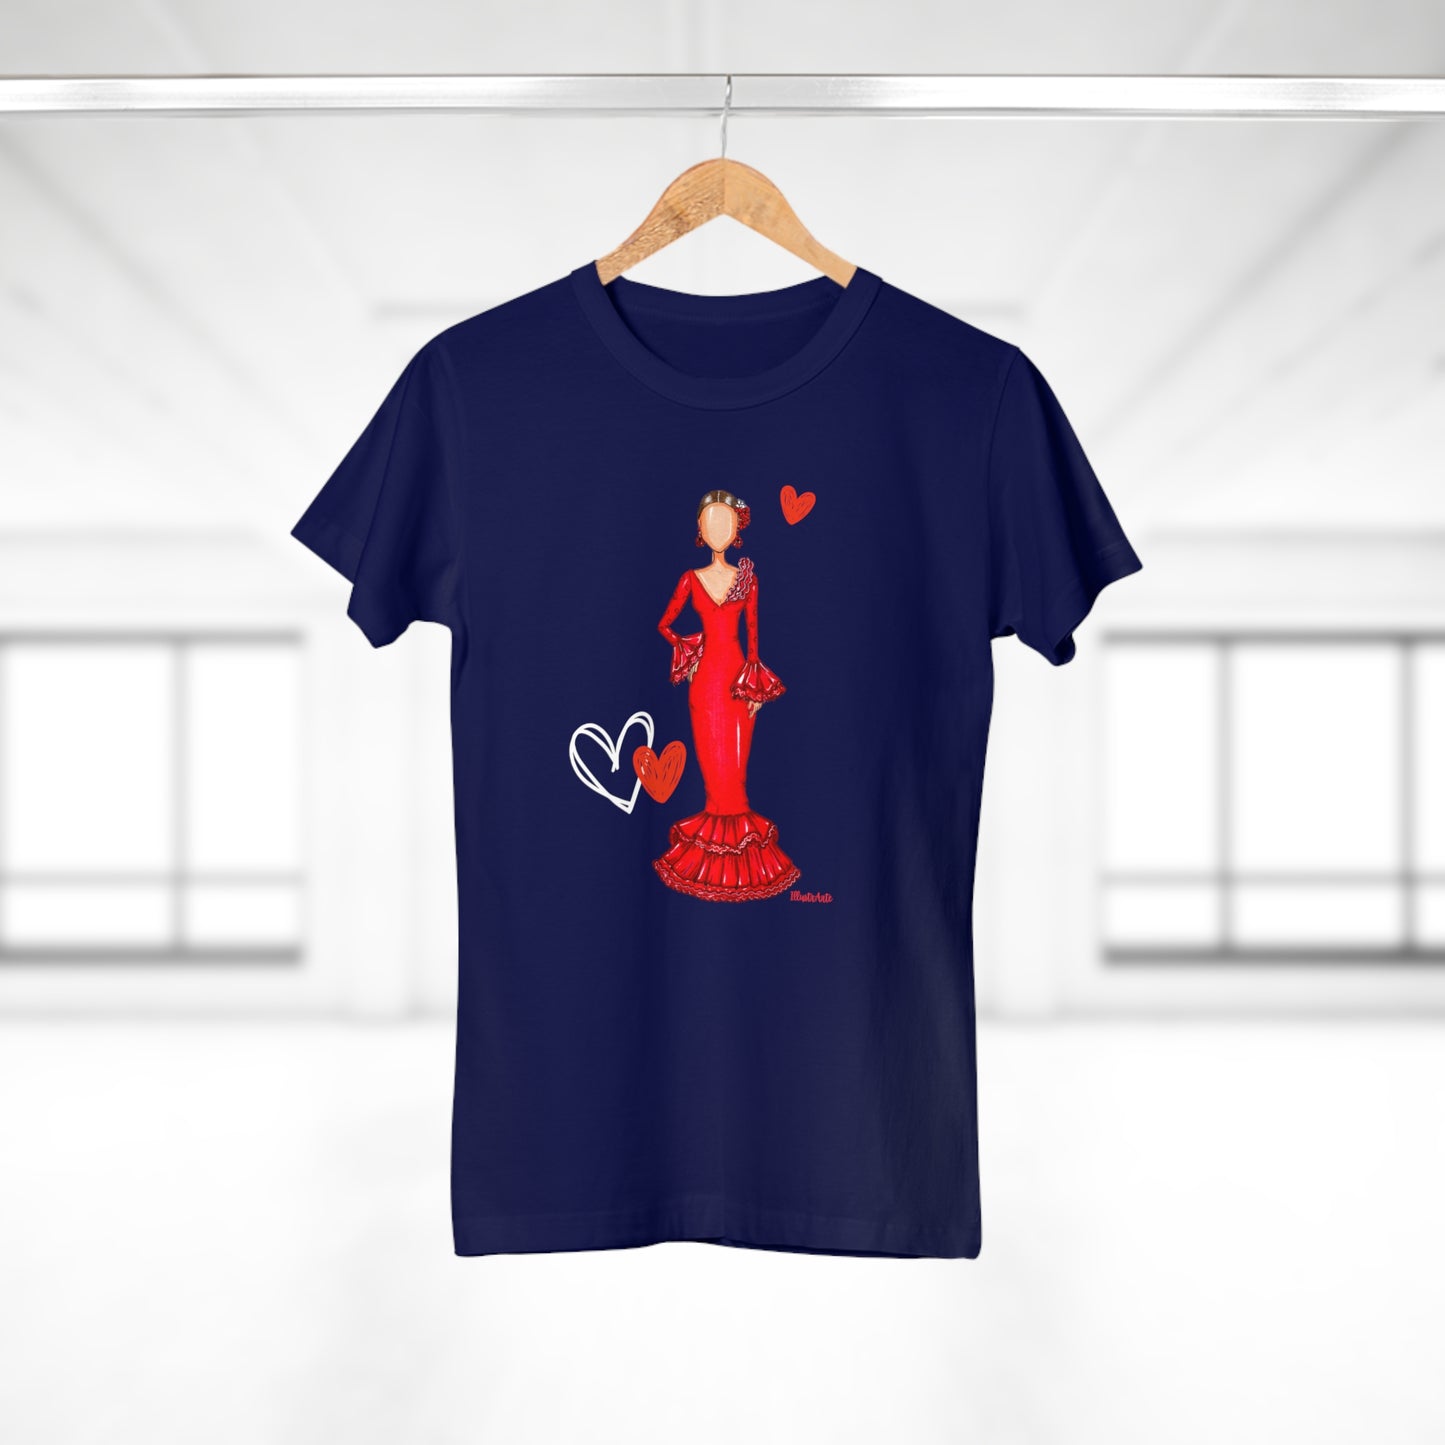 a t - shirt with a woman in a red dress on a hanger